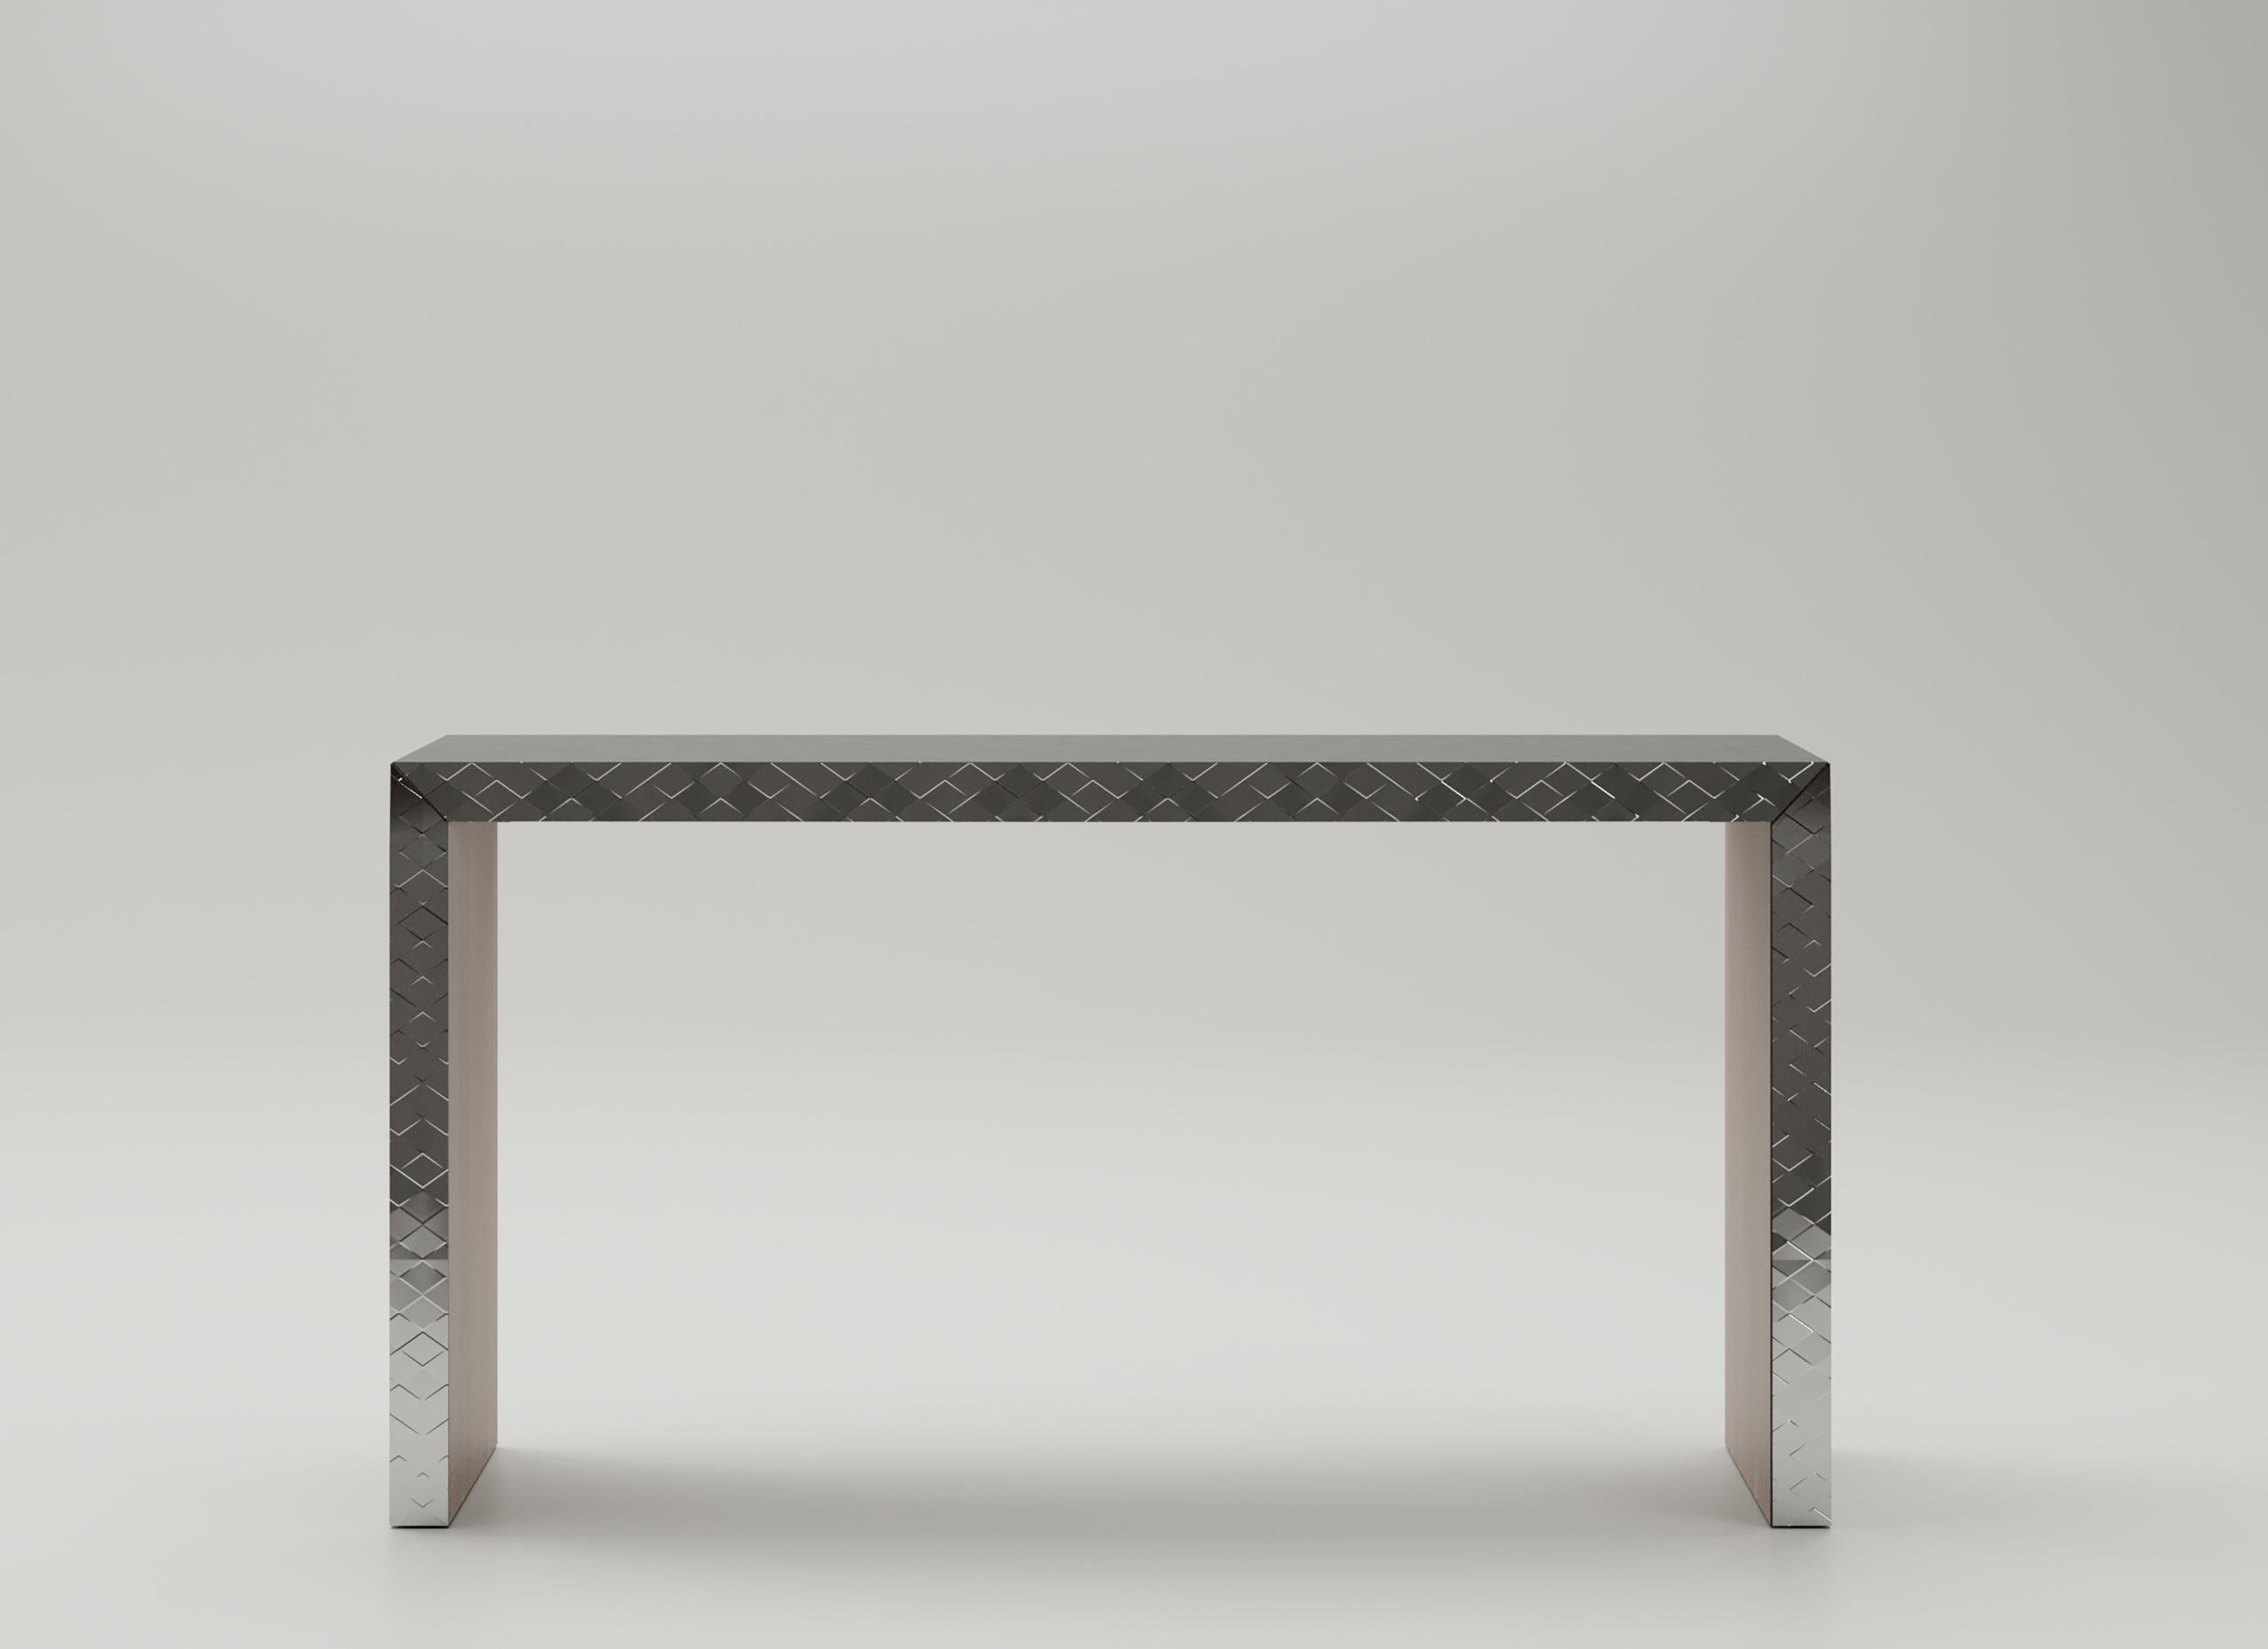 Optical Console by Andrea Bonini
Limited Edition
Dimensions: D 35 x W 135 x H 80 cm.
Materials: Steel with Diamante effect and Canaletto walnut wood.
Finish: Silver galvanic metal and matte wood.
Limited series, numbered and signed pieces. Custom